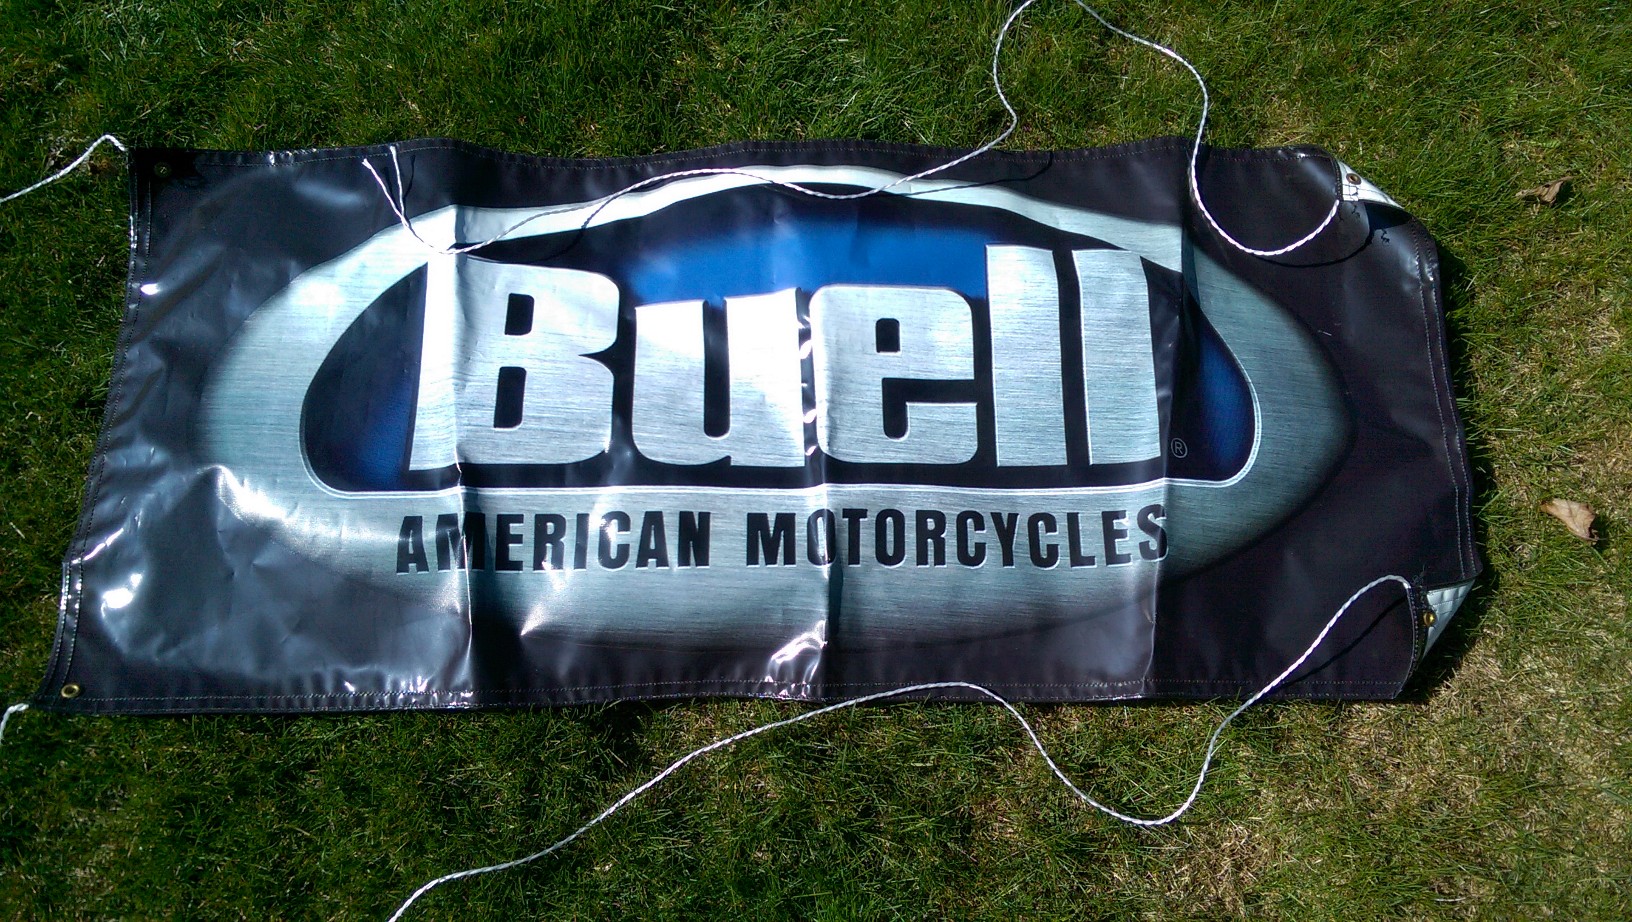 Image of Buell banner